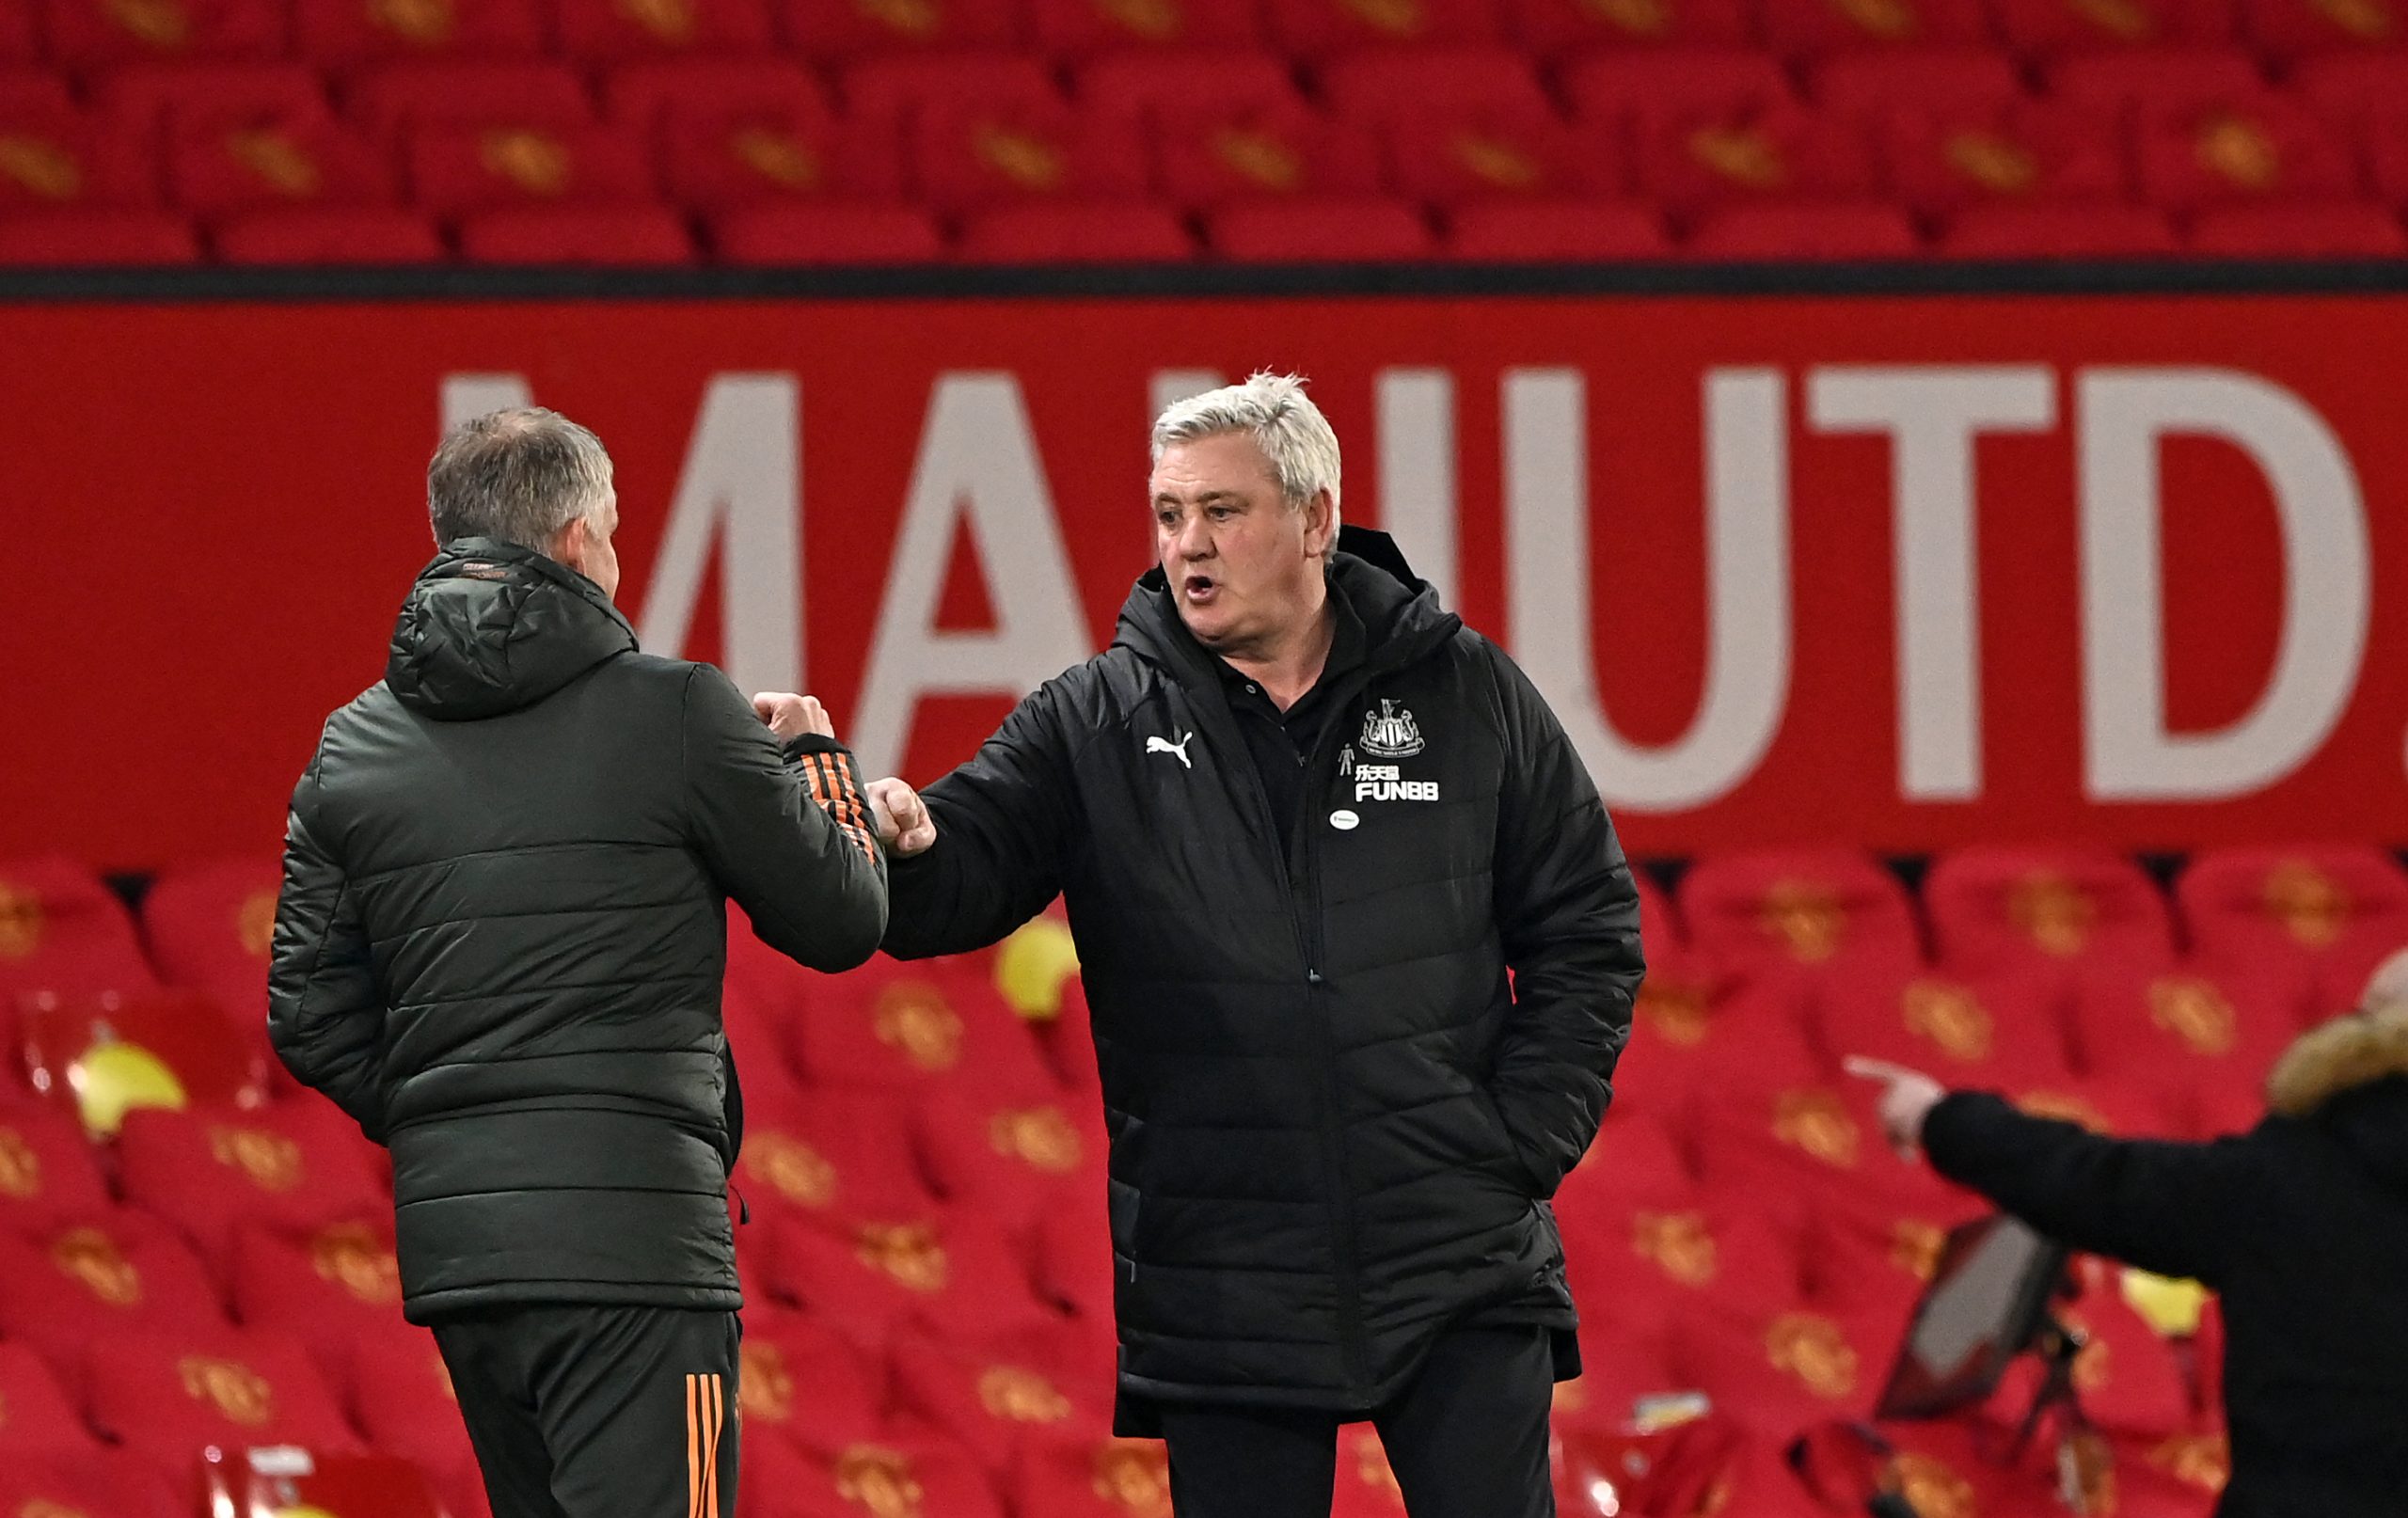 Steve Bruce and Ole Gunnar Solskjaer after Manchester United beat Newcastle United. (GETTY Images)